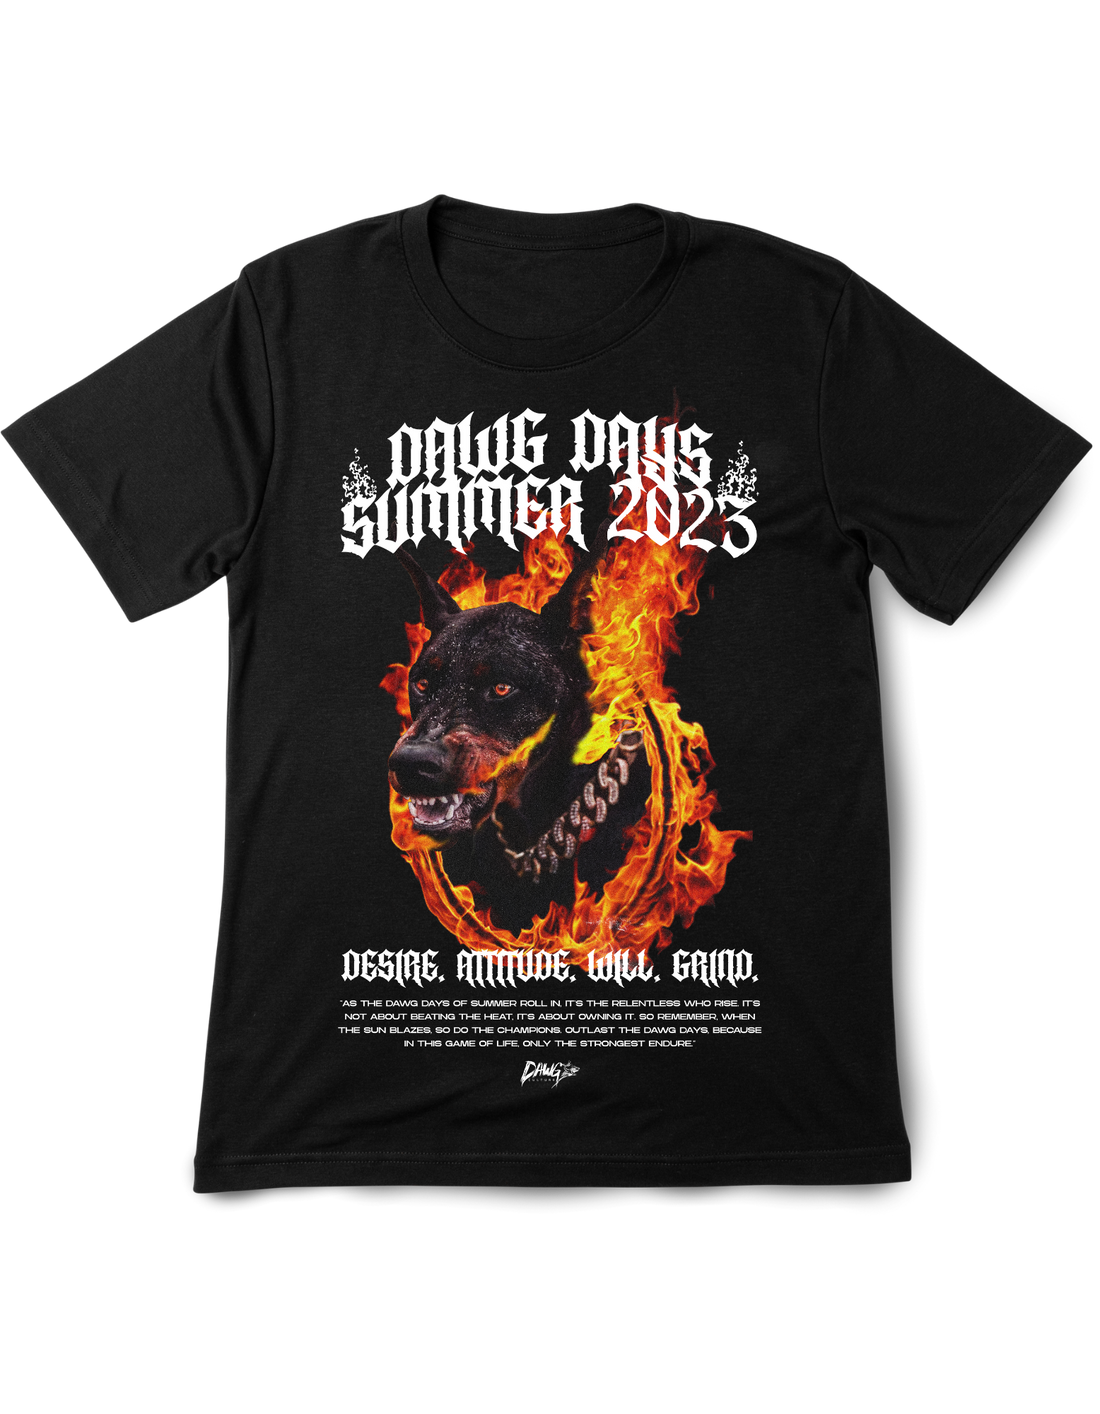 **PRE-ORDER** DAWG Days 2023 T-Shirt "THE HOTTEST"